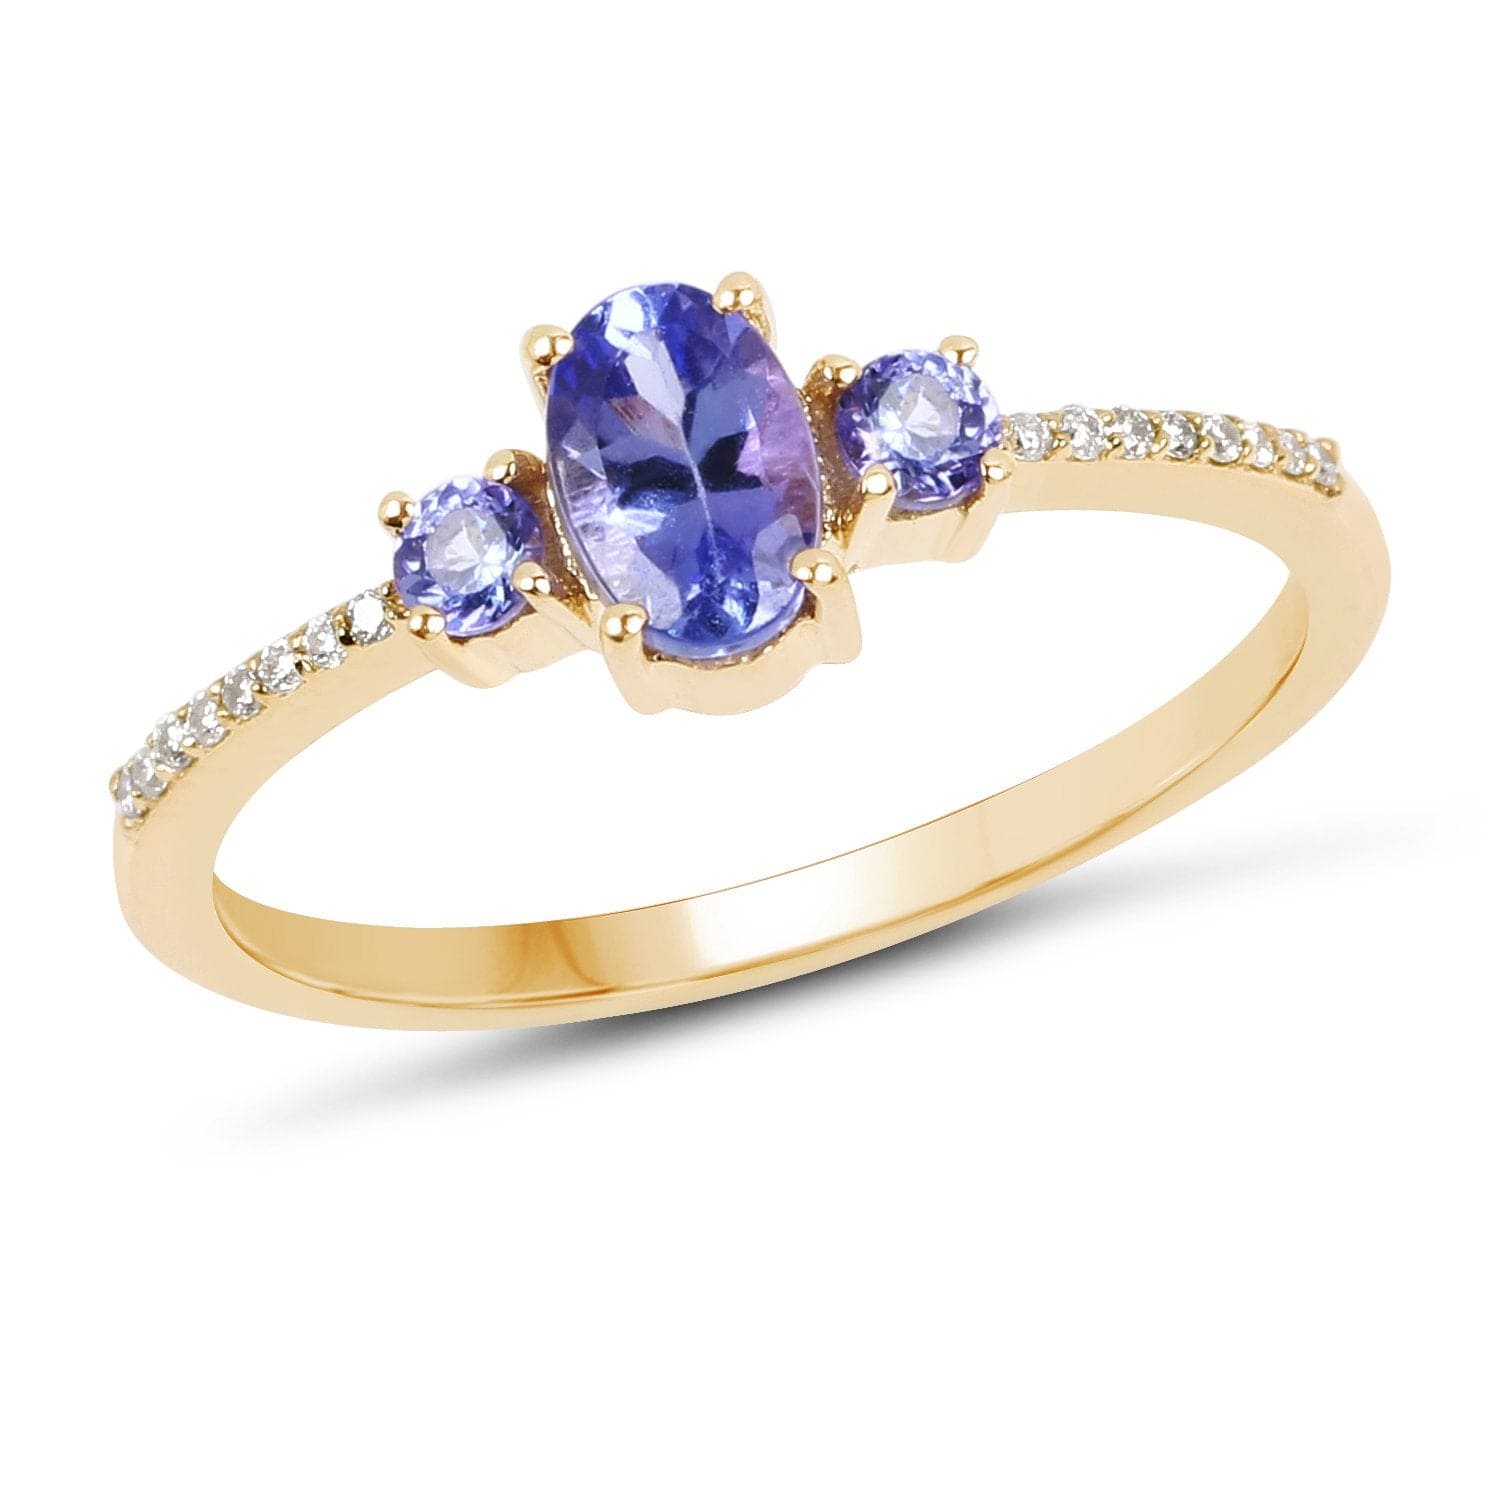 Tanzanite and Diamond 3 Stone Ring in Solid 14K Yellow Gold, So Elegant and Dainty! - The Pink Pigs, A Compassionate Boutique